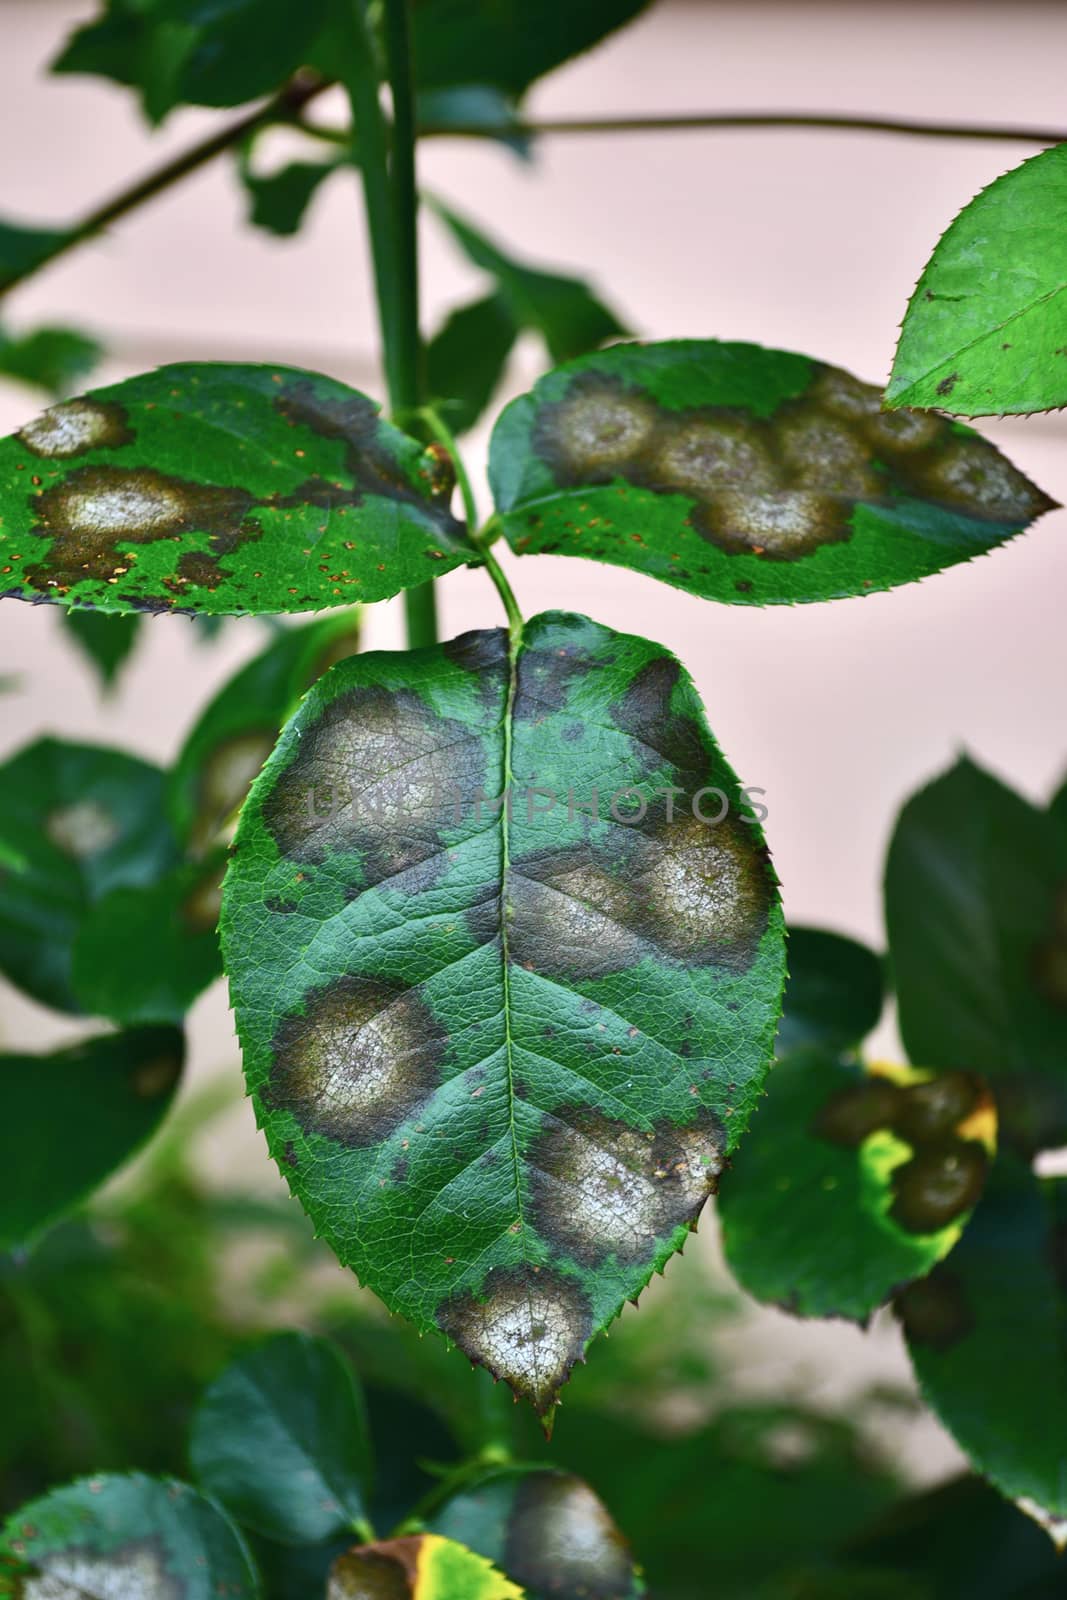 A close up of a rose leaf affected by black spot disease. This is the most serious disease of roses caused by a fungus, Diplocarpon rosae, which infects the leaves and greatly reduces plant vigour. by Marshalkina